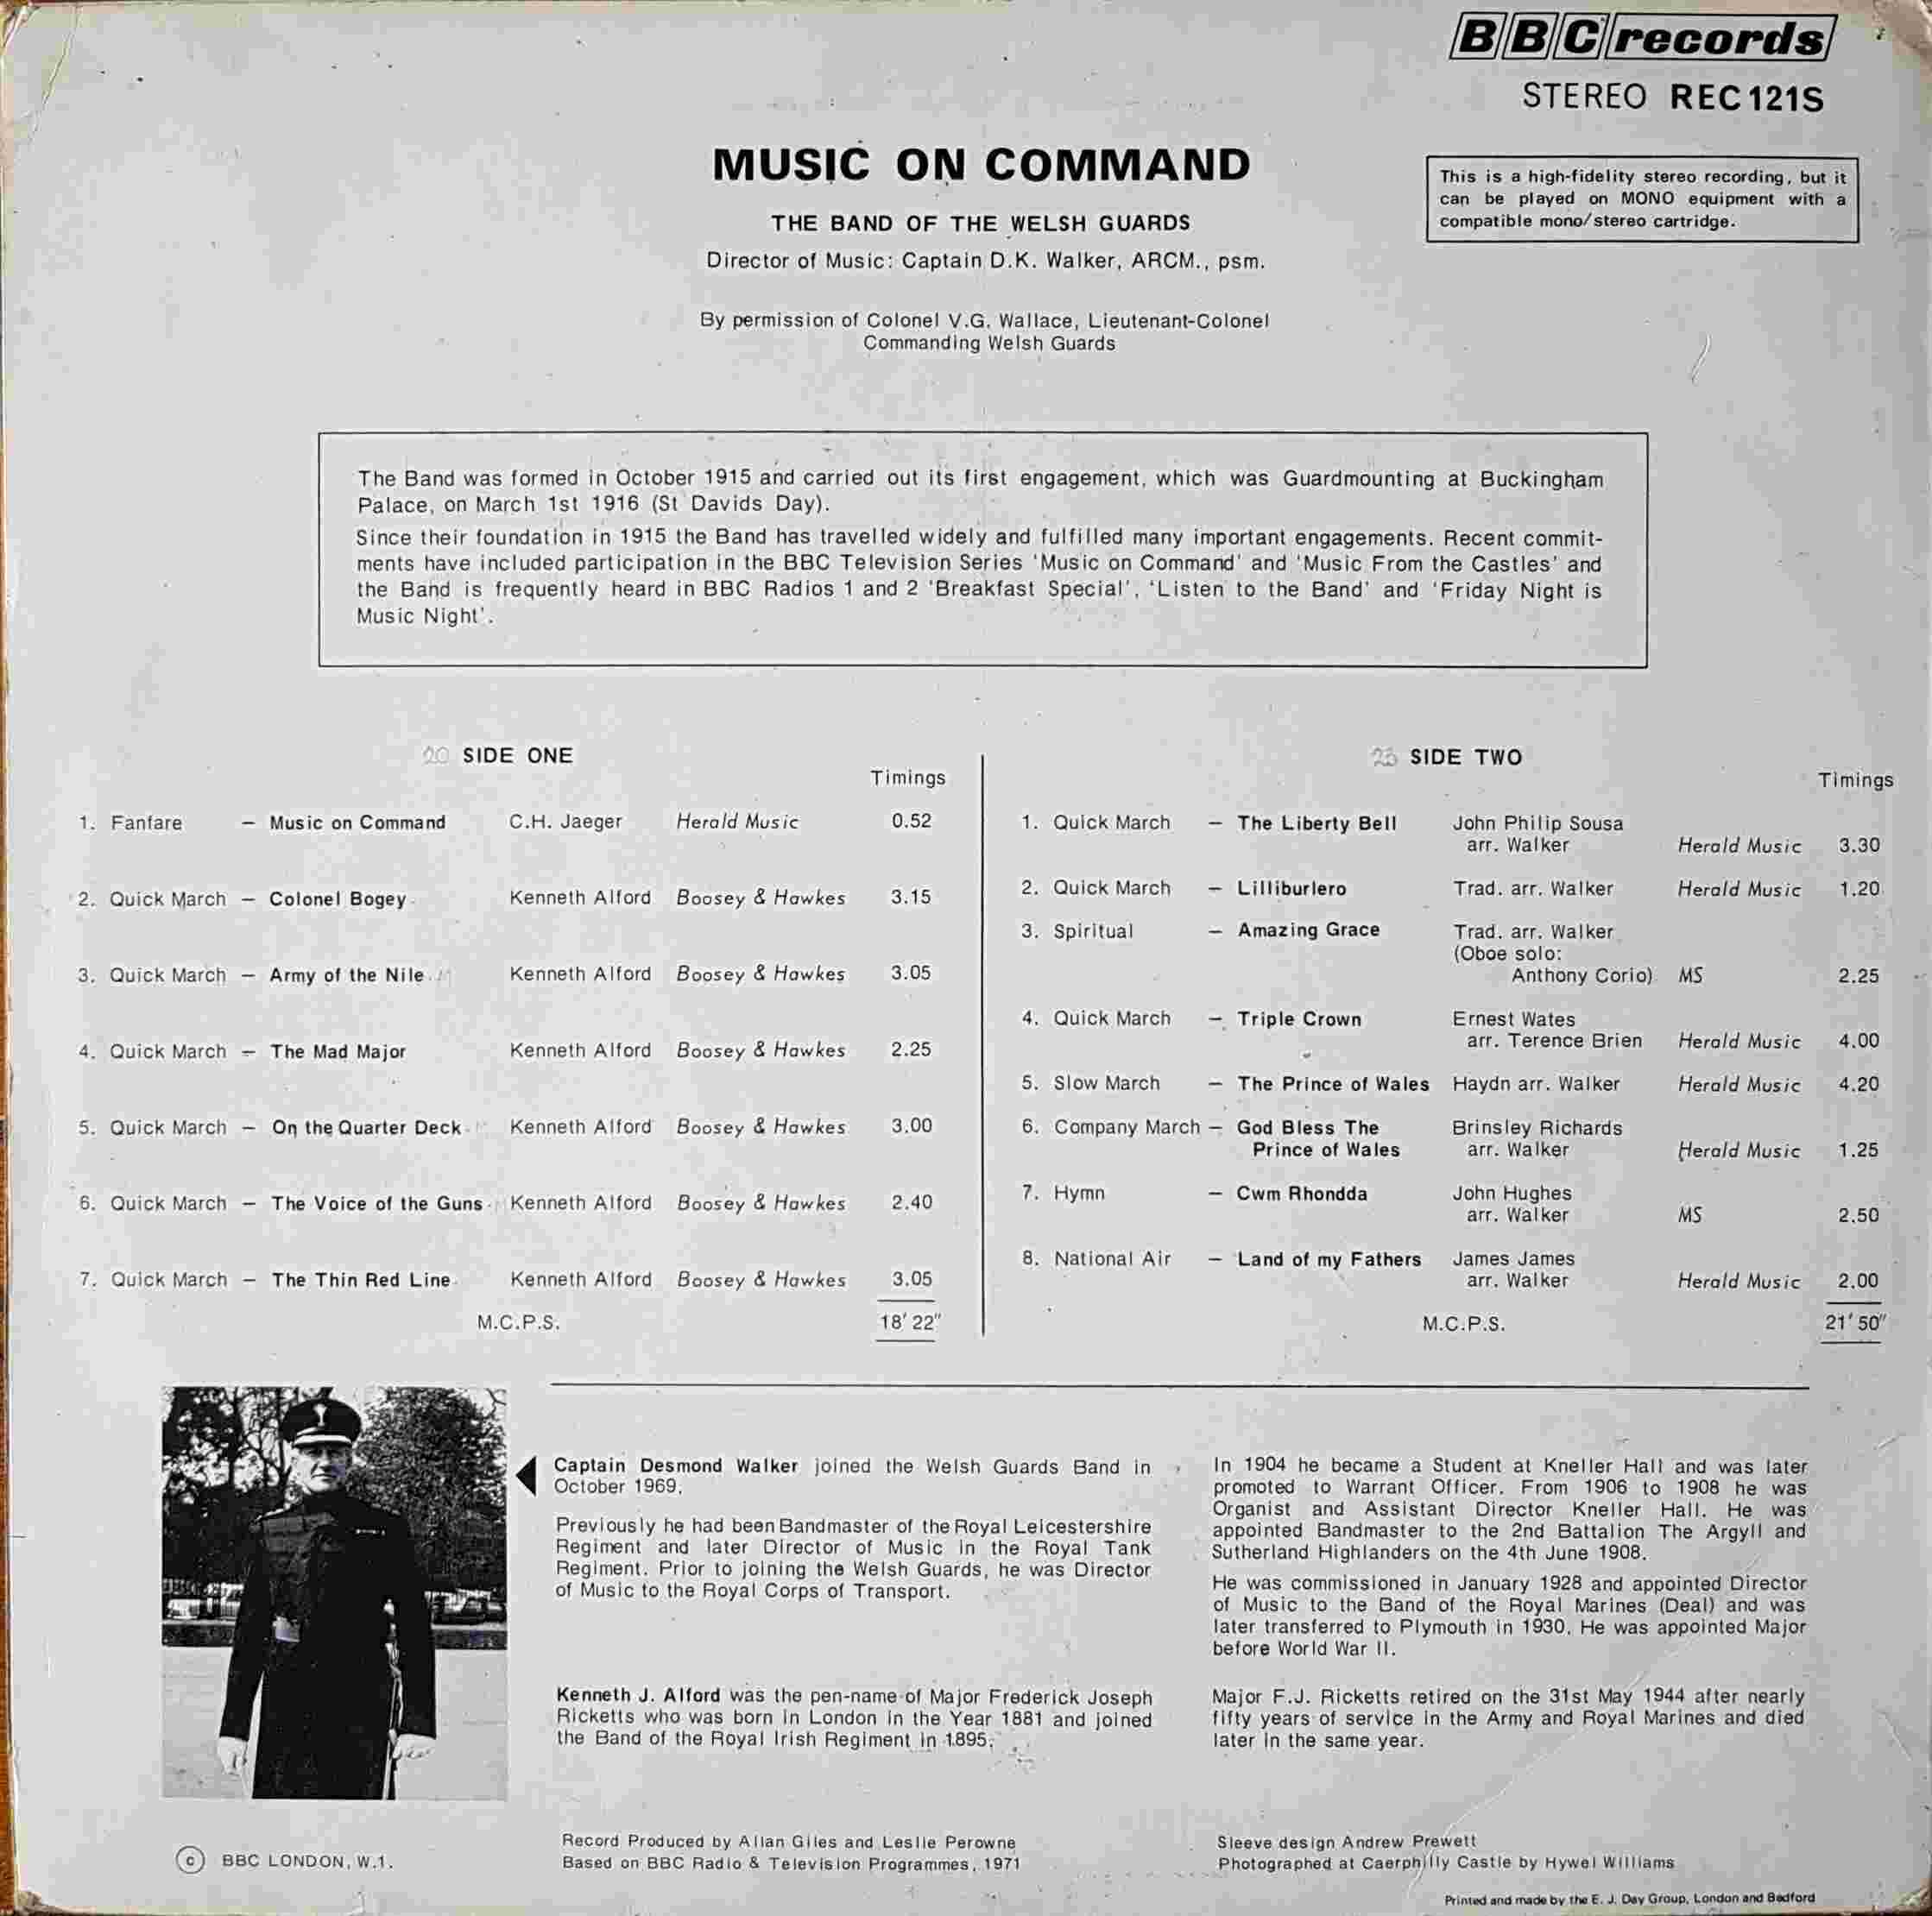 Picture of REC 121 Music on command by artist Various from the BBC records and Tapes library